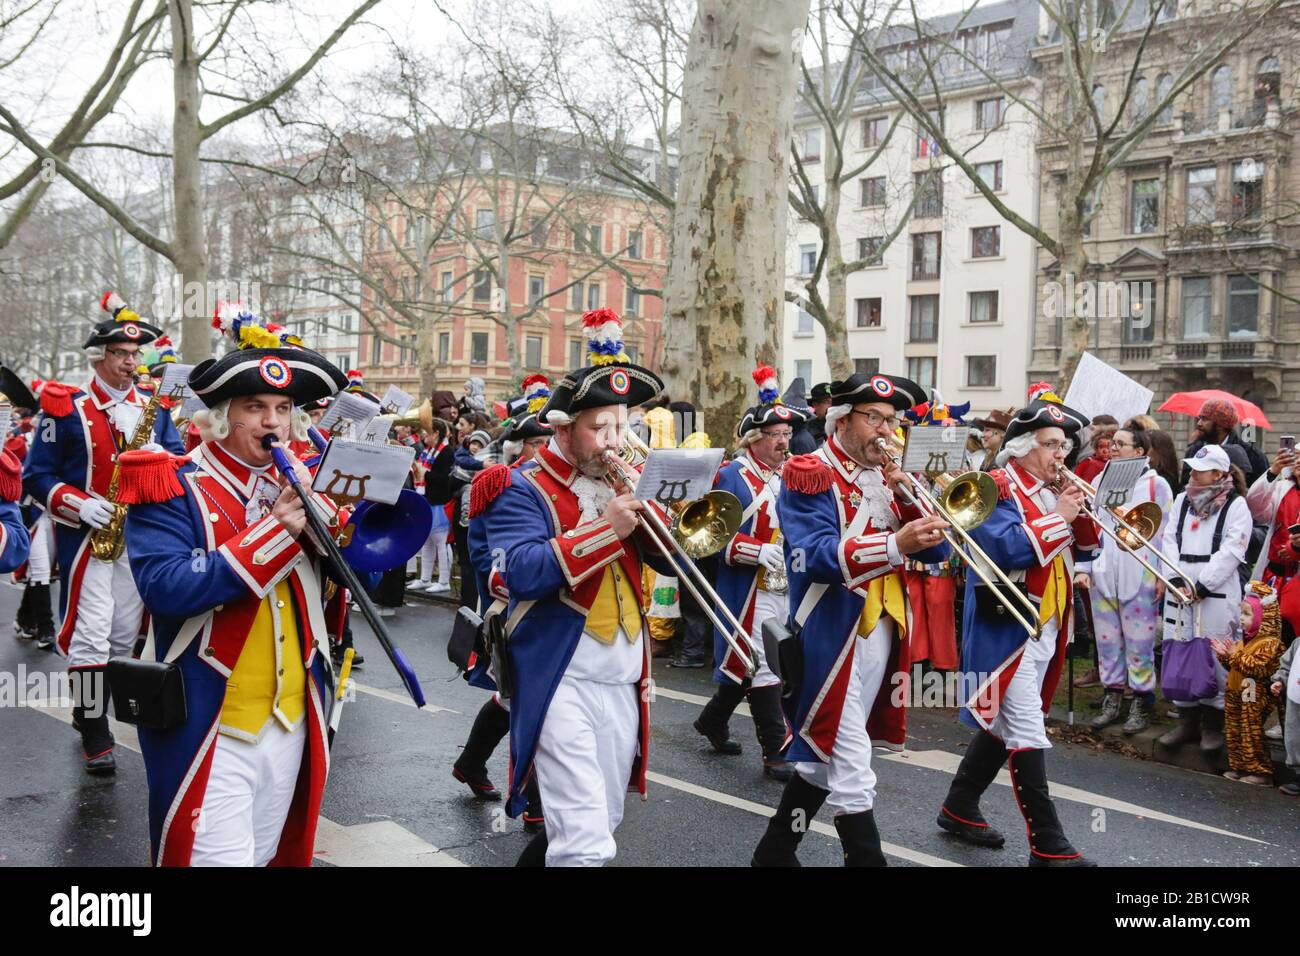 Mainz, Germany. 24th February 2020. Members of the marching band of the Mainzer Ranzengarde take part at the the Mainz Rose Monday parade. Around half a million people lined the streets of Mainz for the traditional Rose Monday Carnival Parade. The 9 km long parade with over 9,000 participants is one of the three large Rose Monday Parades in Germany. Stock Photo